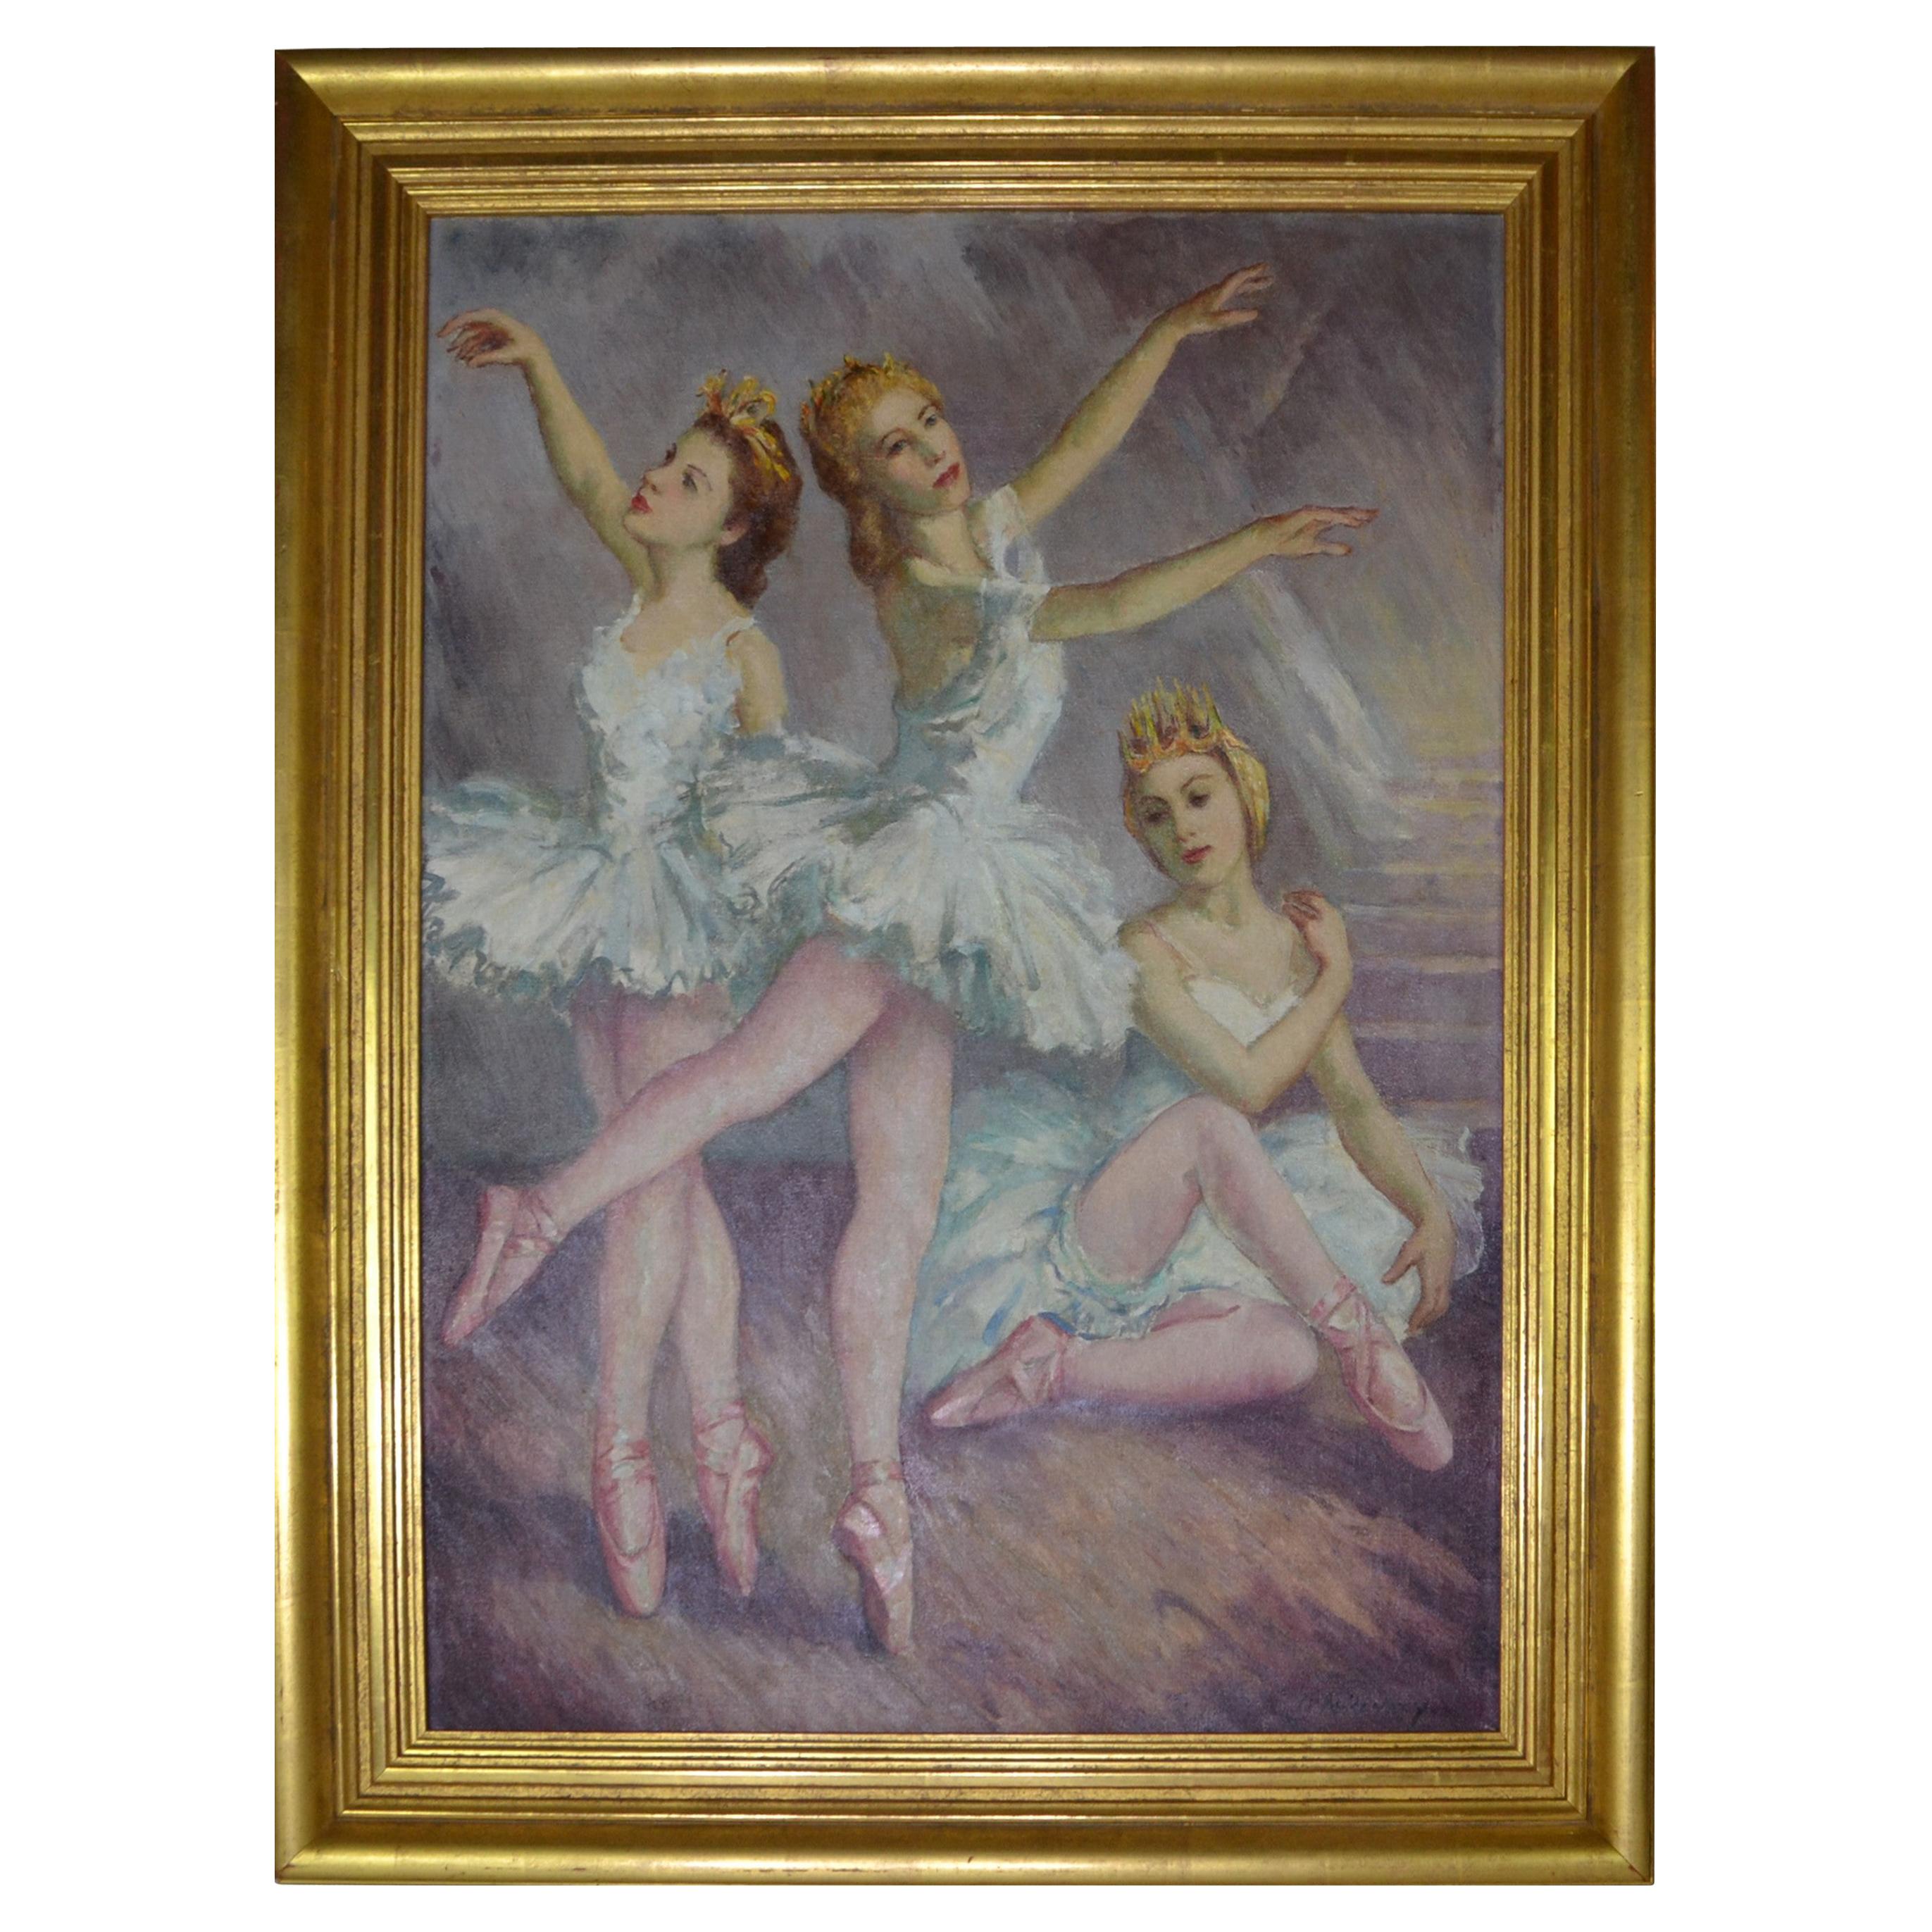 Oil on Canvas Painting "the Ballet" Signed